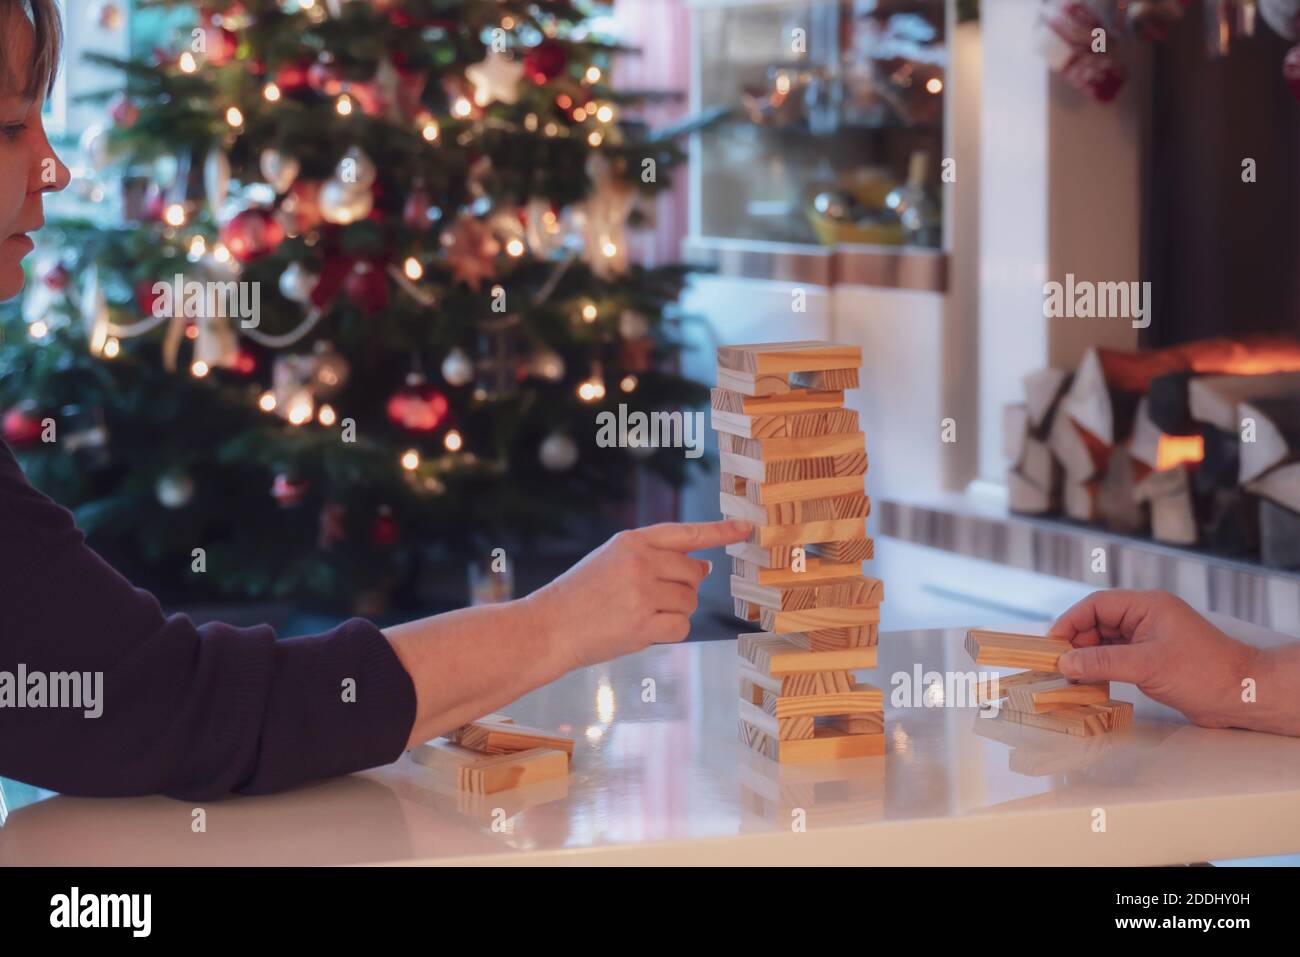 During the Christmas season, the family plays board games together. Woman and man build a wobbly tower from wooden blocks. In the background is the Ch Stock Photo